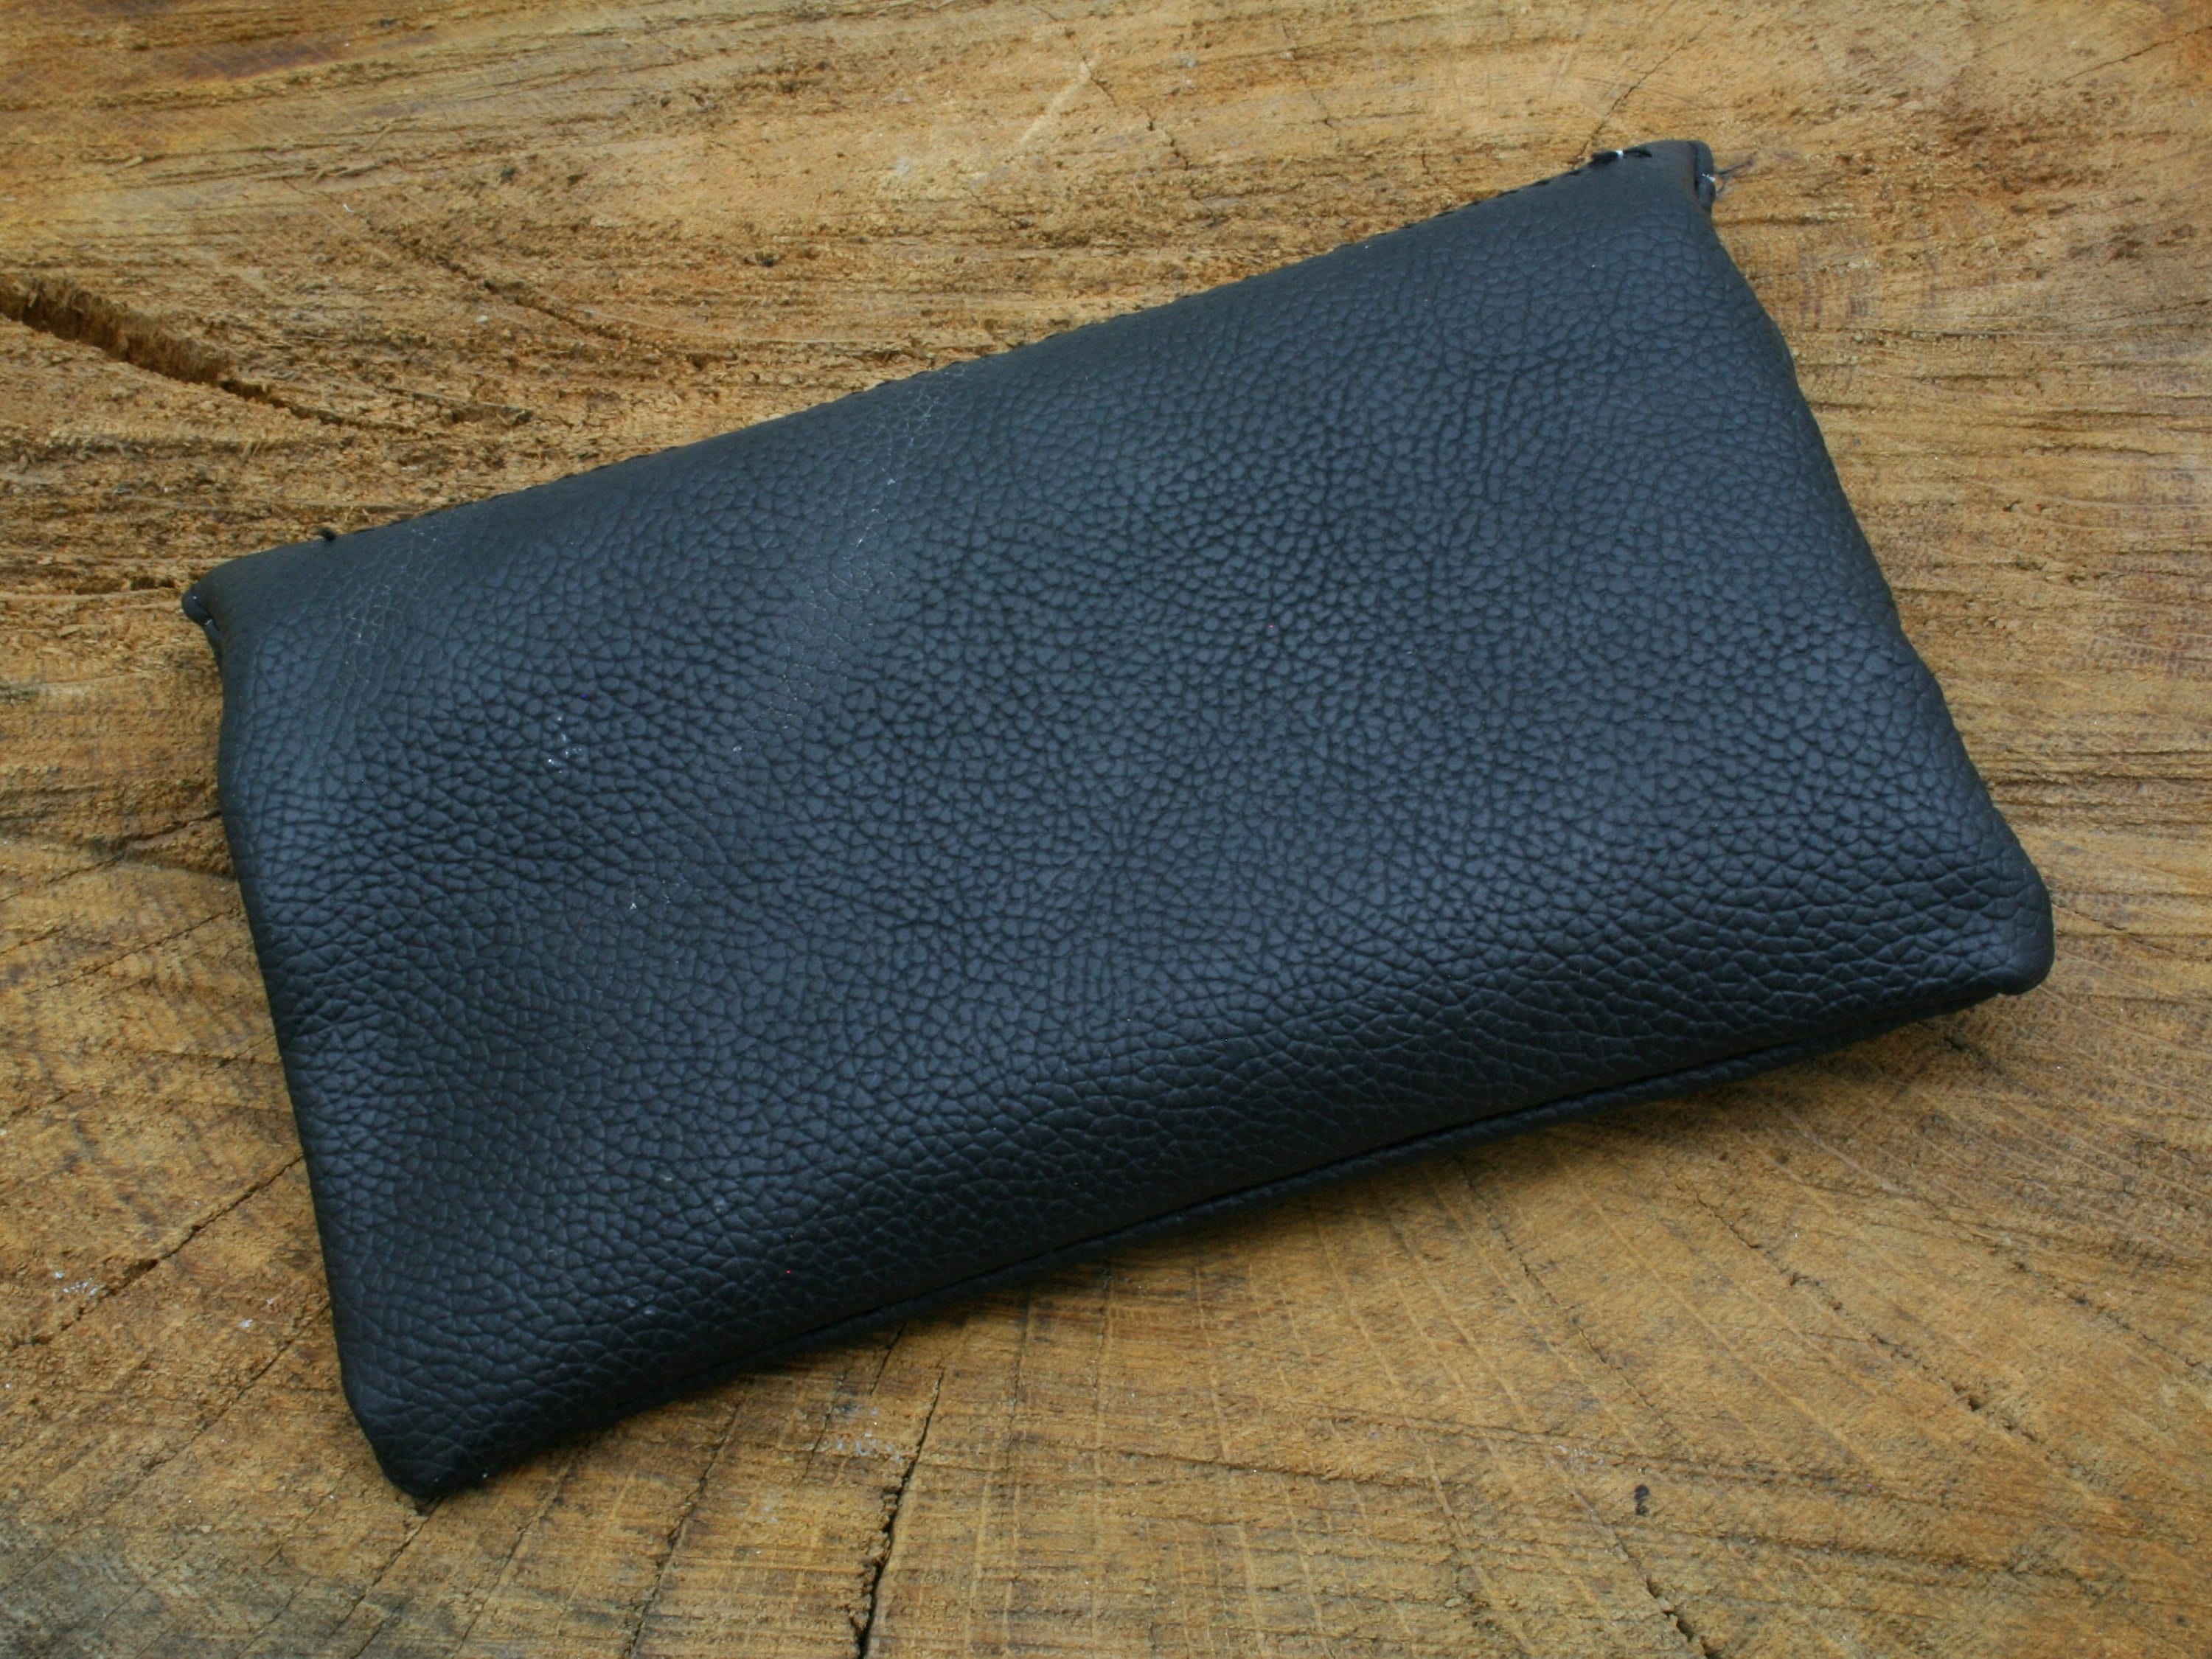 Shop Leather Tobacco pouch at Fashion Racing